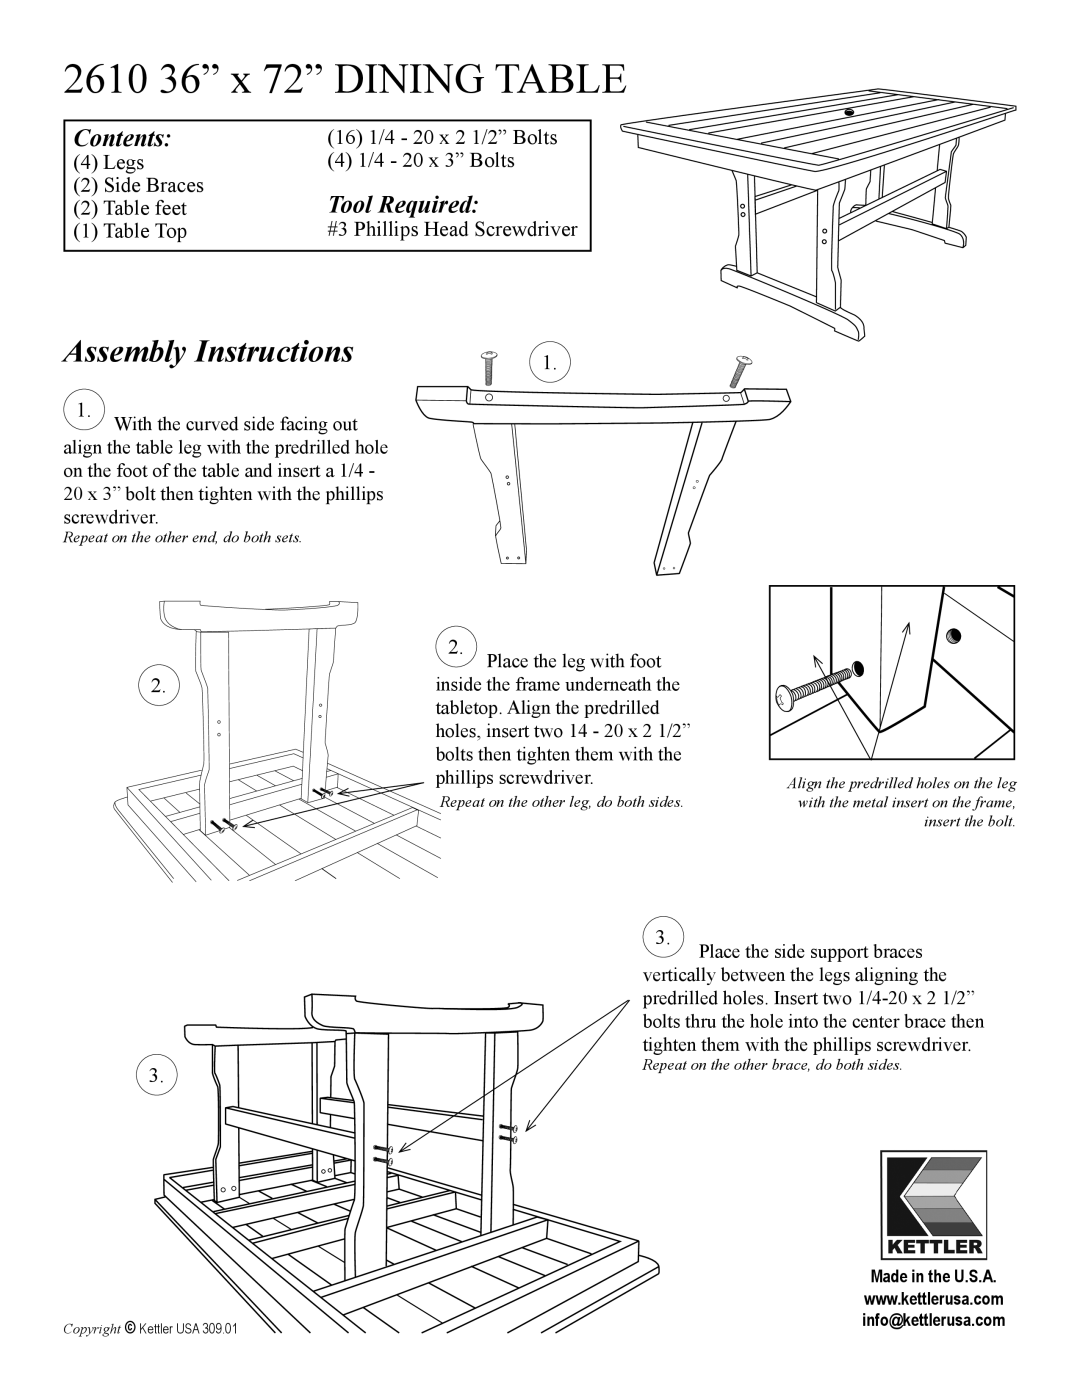 Kettler manual 2610 36” x 72” DINING TABLE, Assembly Instructions, Contents, Tool Required 